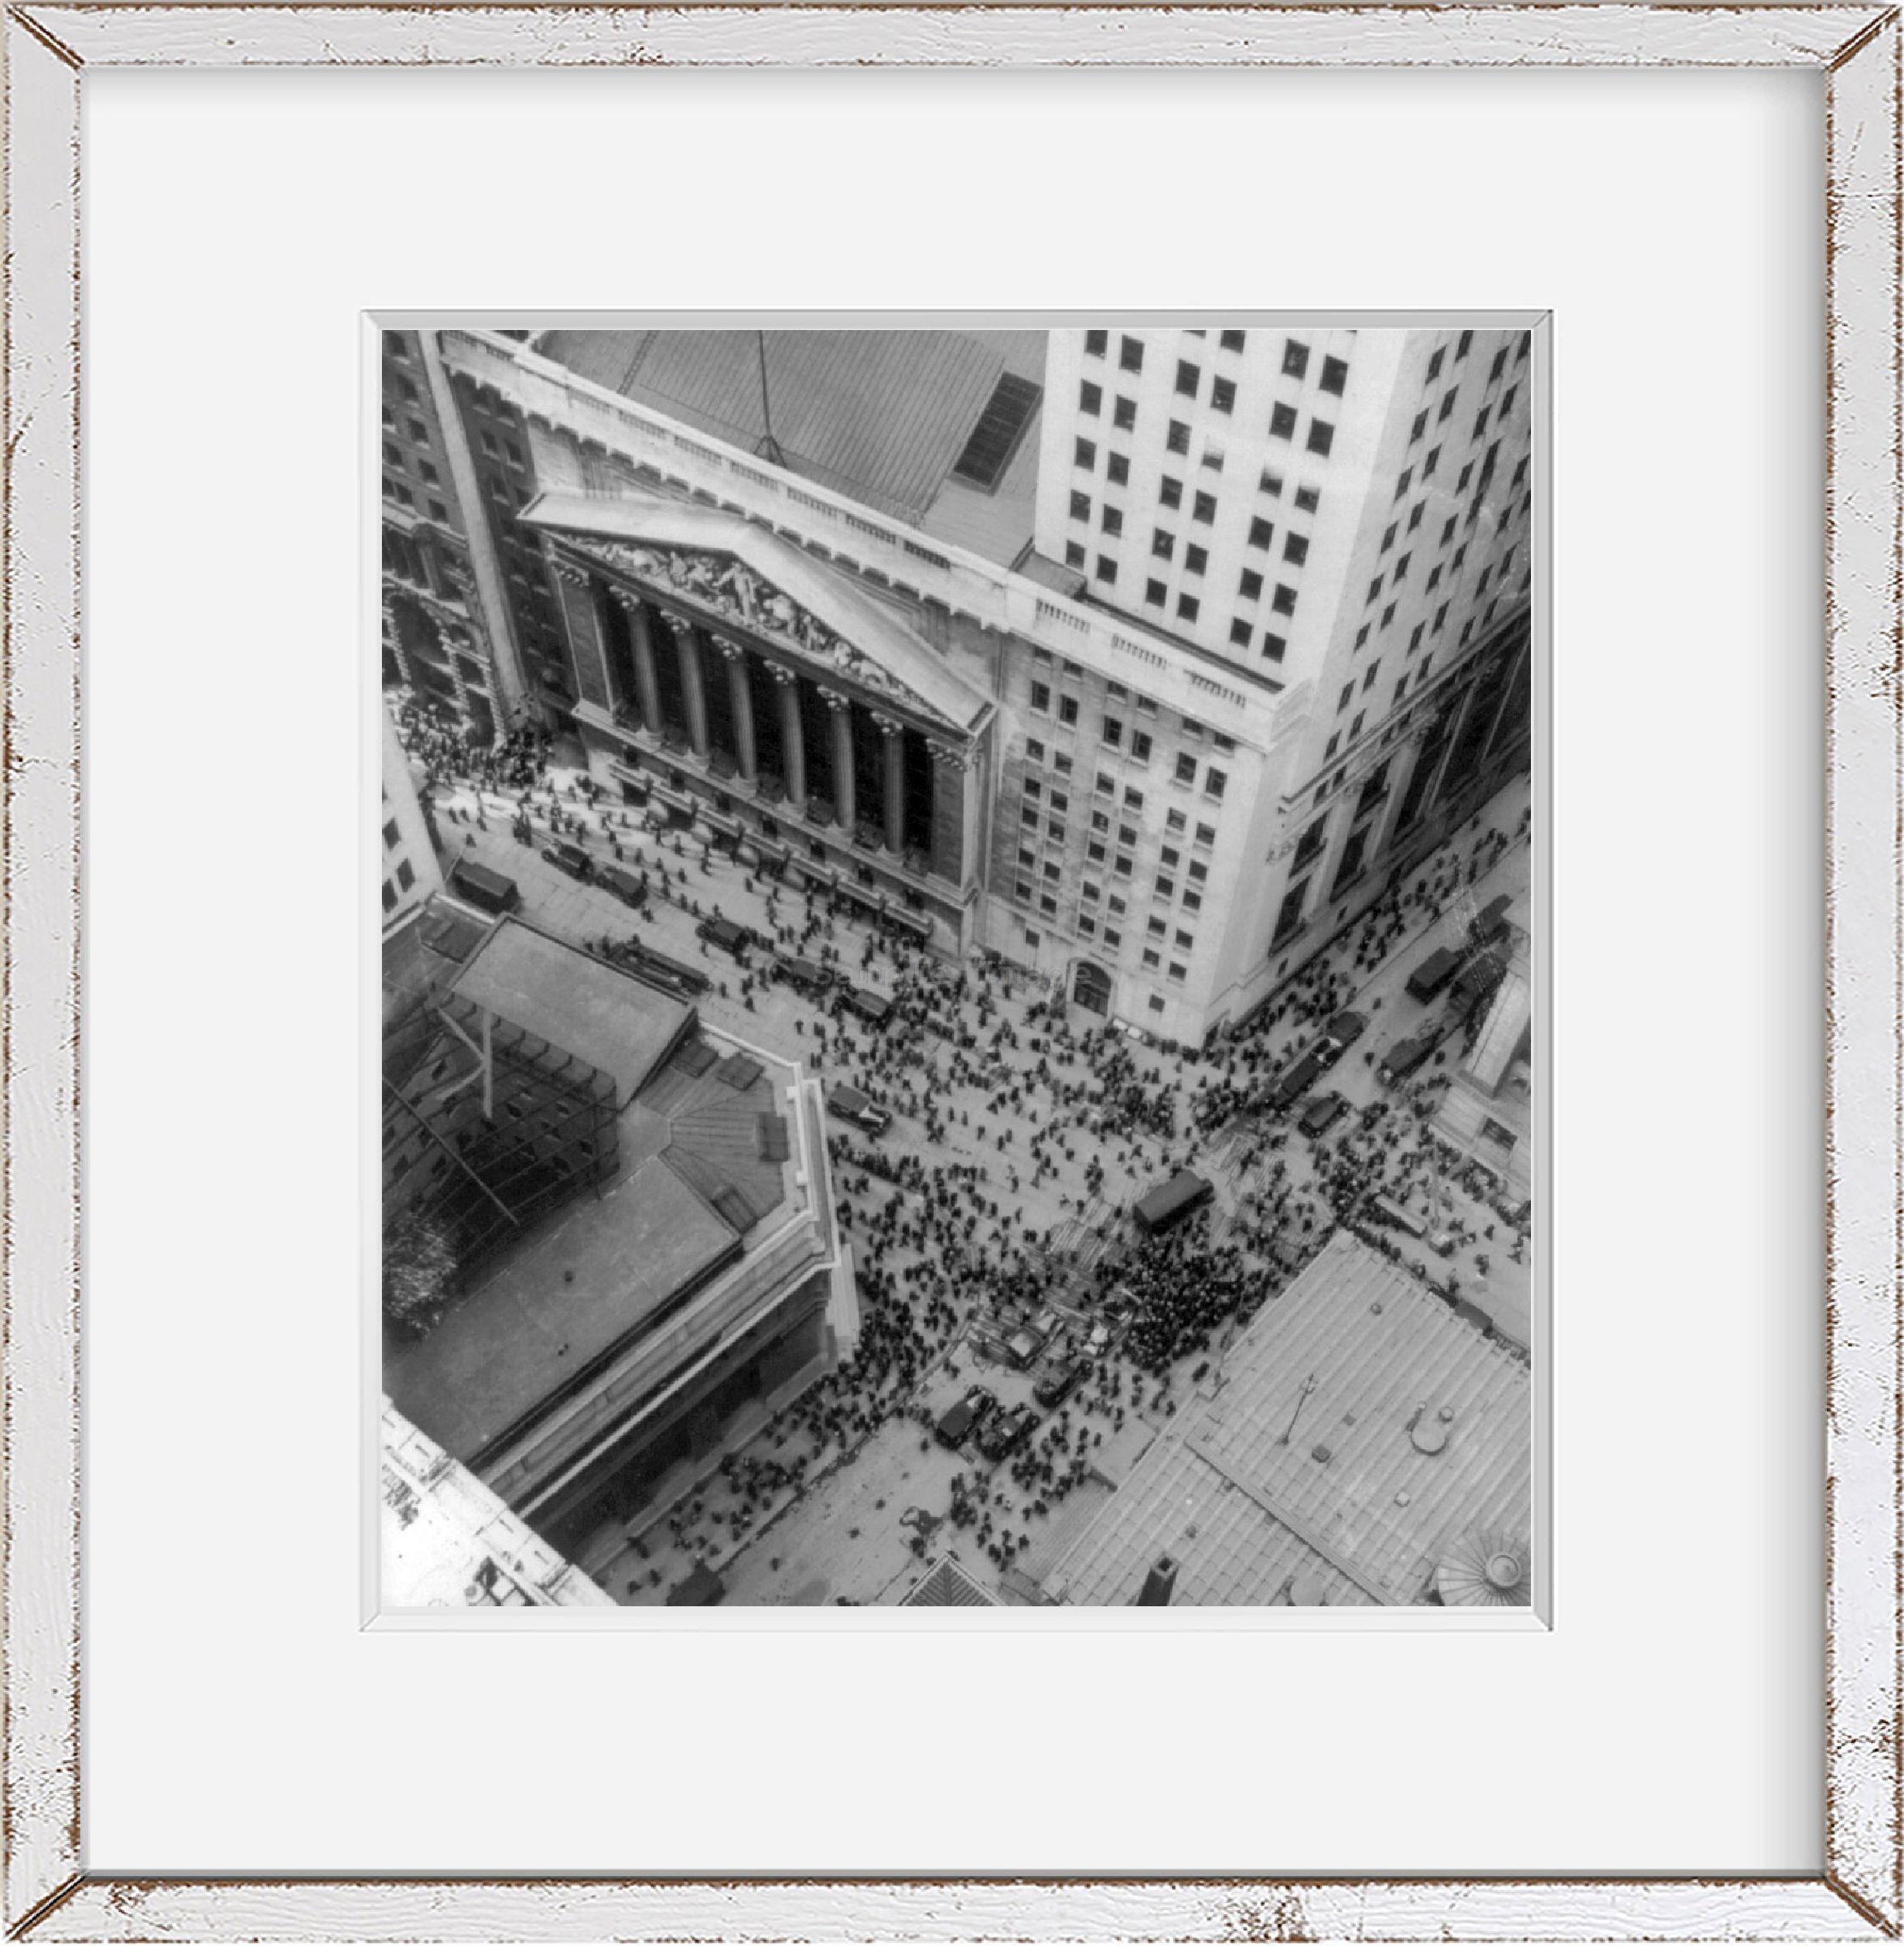 Photo: Wall Street, New York City, NYC, aerial view looking down on stock exchange,